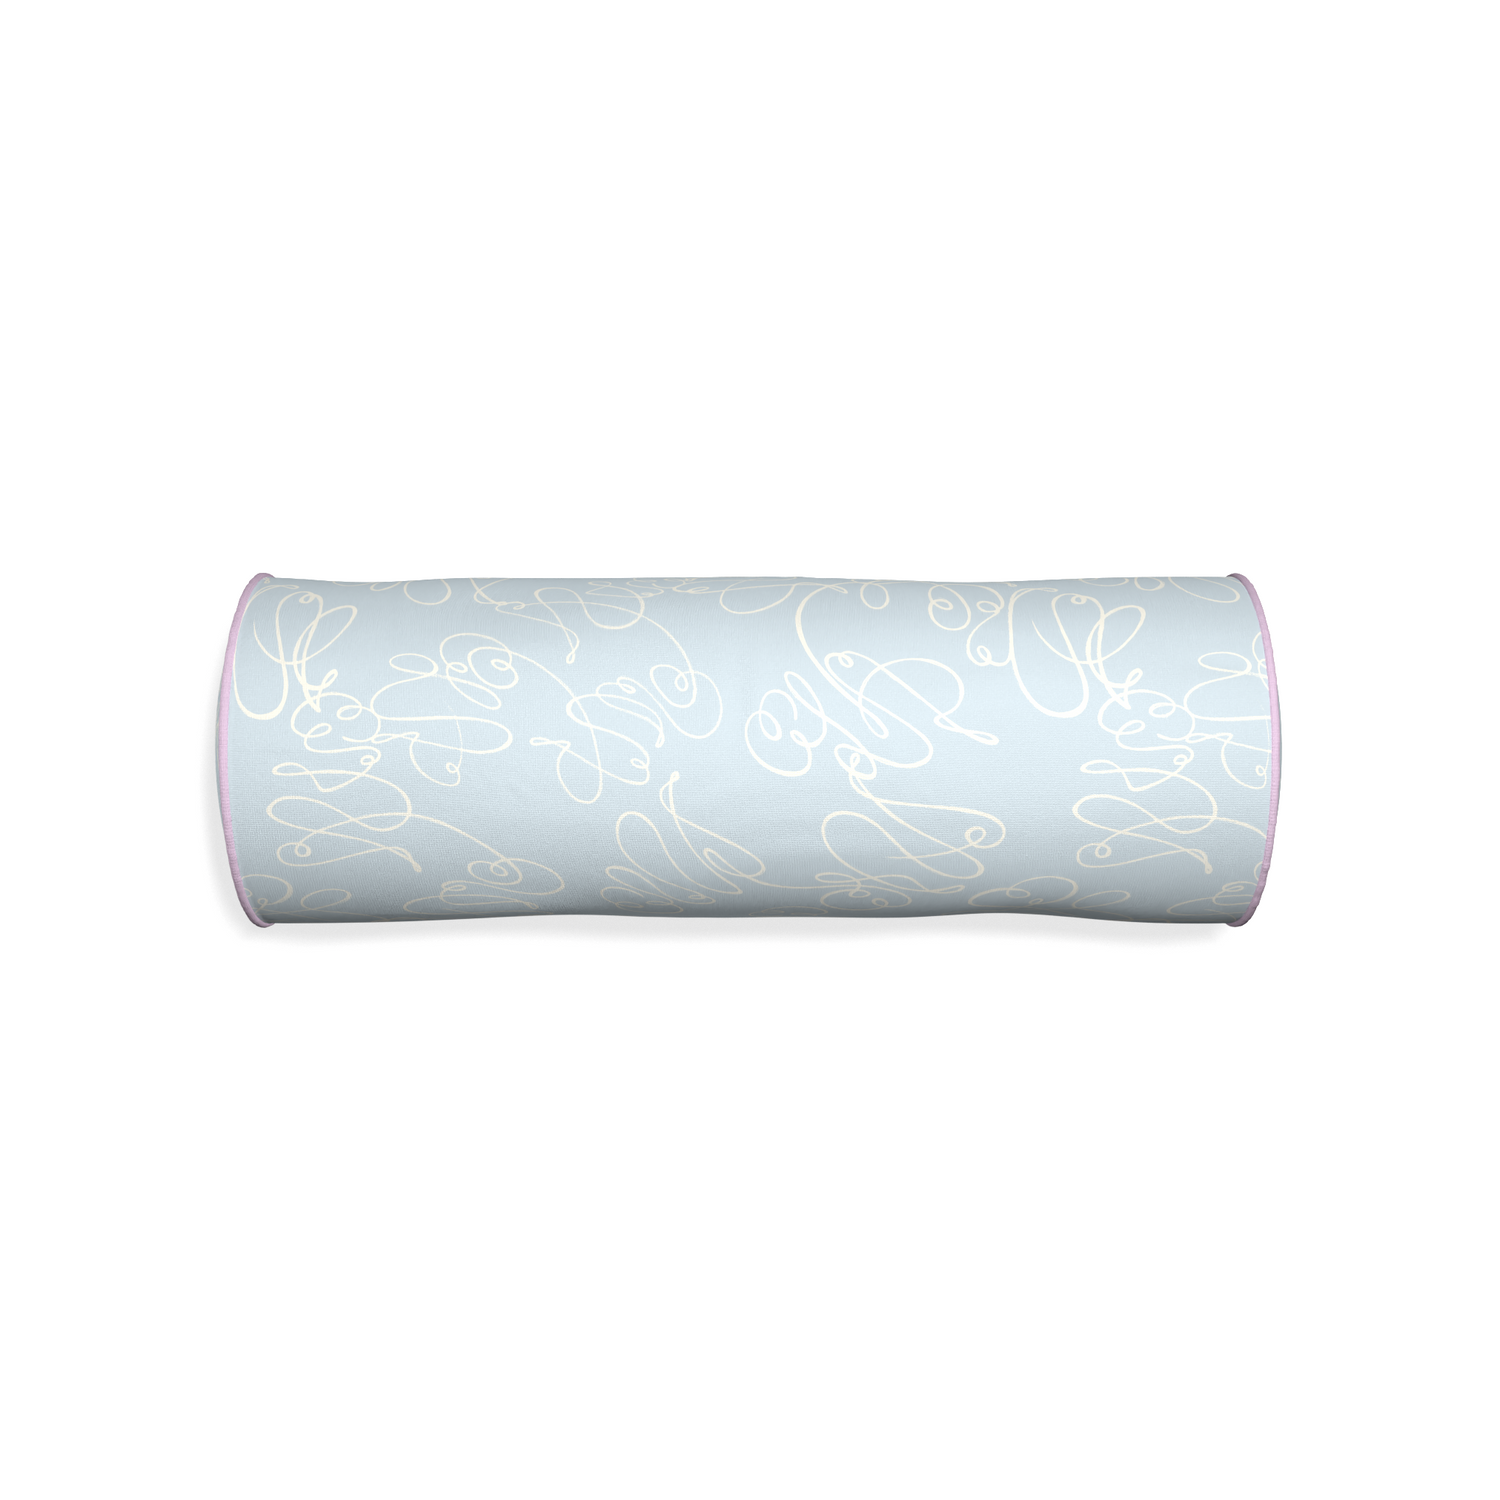 Bolster mirabella custom powder blue abstractpillow with l piping on white background